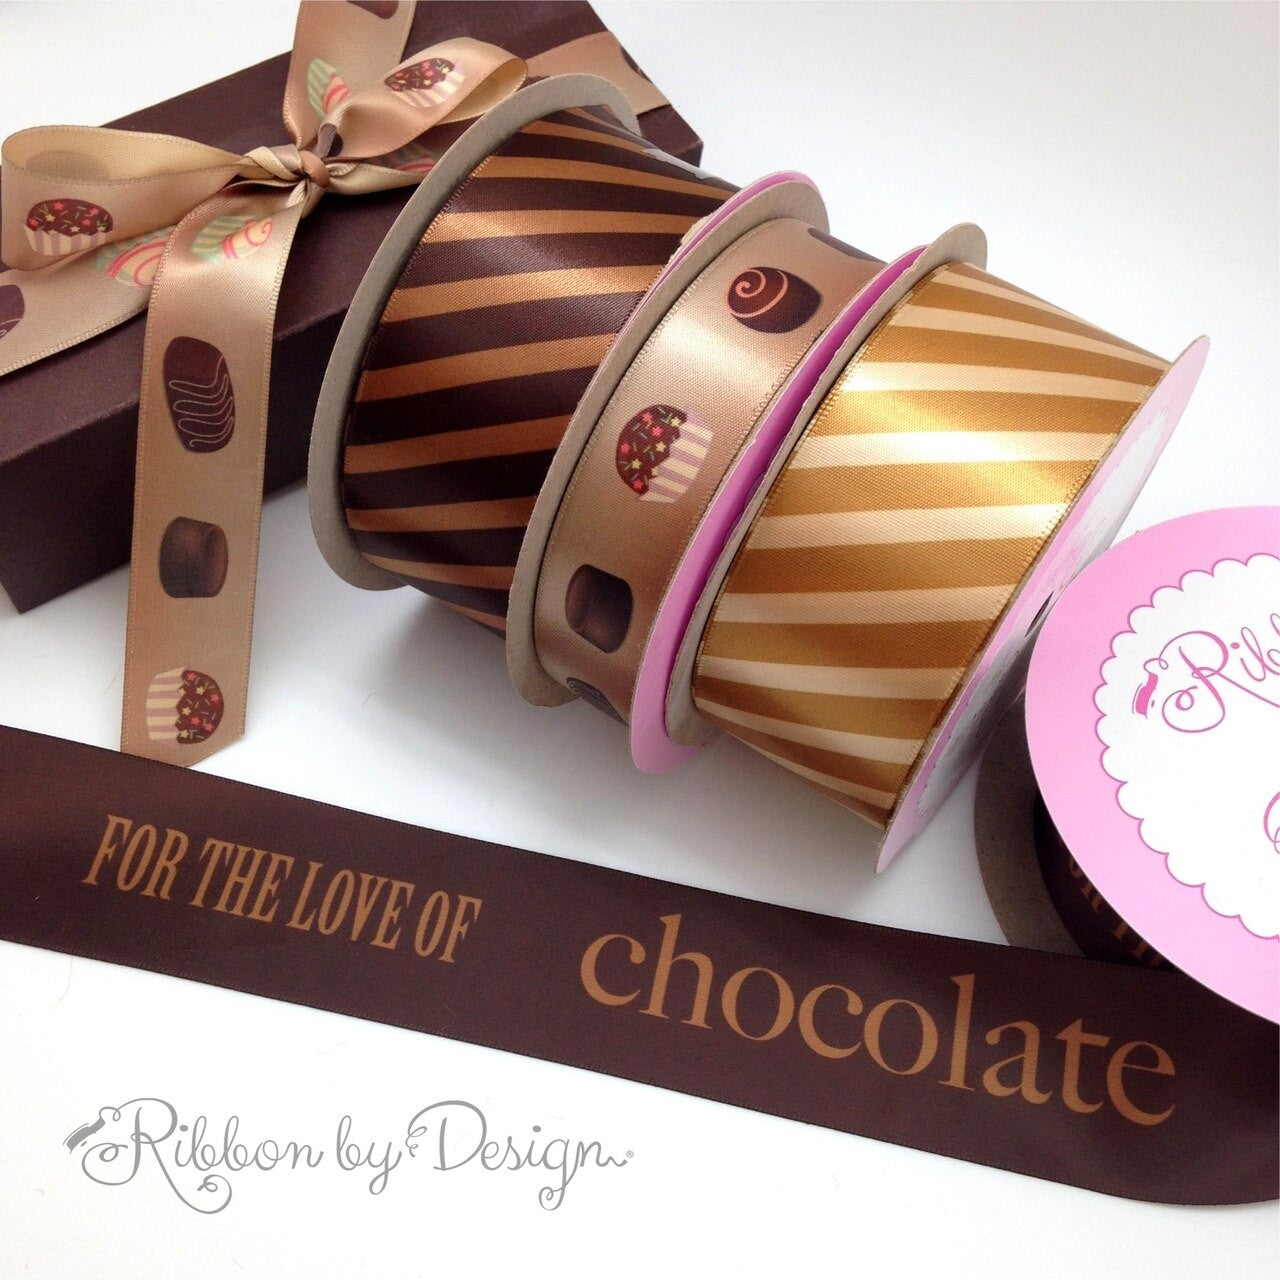 Mix and match all our fun chocolate and caramel ribbons for a beautiful presentation of chocolate treats!